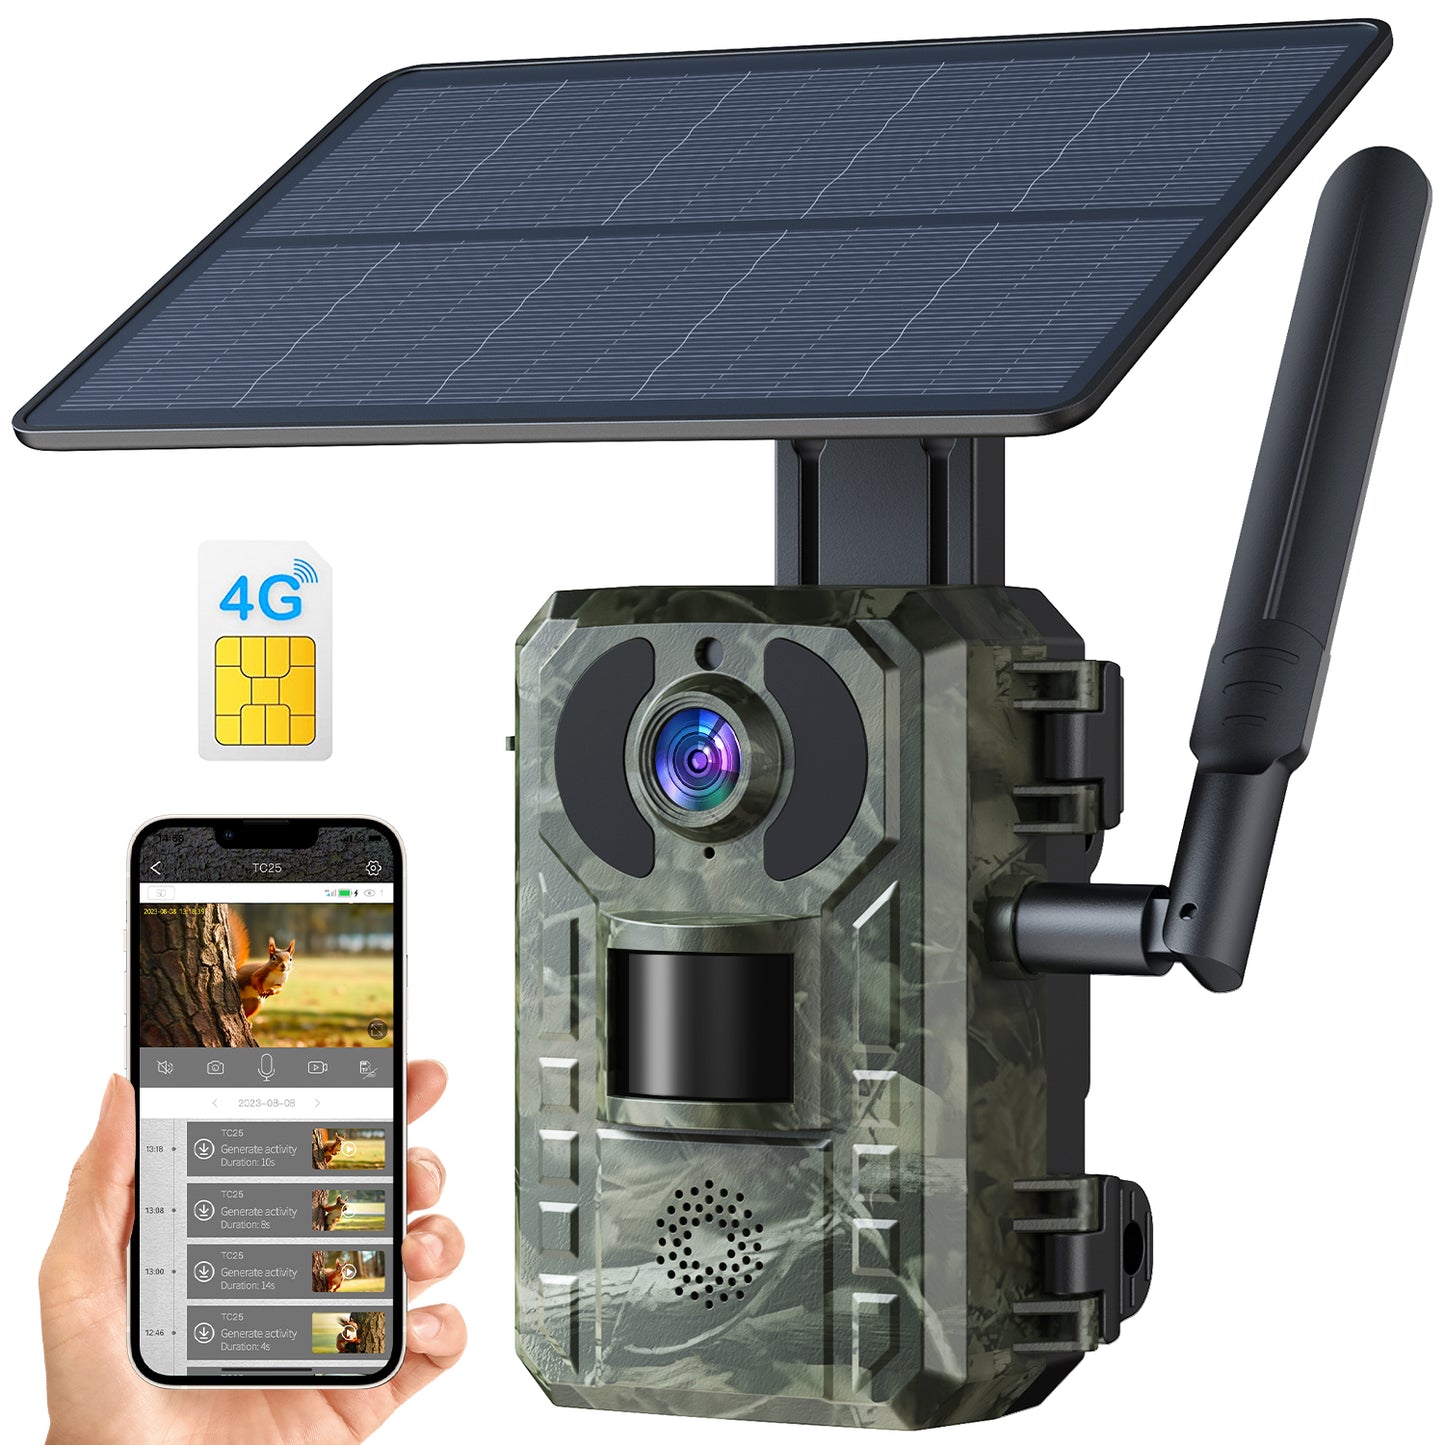 CAMPARK Trail Camera with 4G Cellular Solar, 2.5K 14MP Hunting Game Camera with Live View and Motion Alerts, 940nm No Glow Night Vision and IP66 Waterproof for Wildlife Monitoring